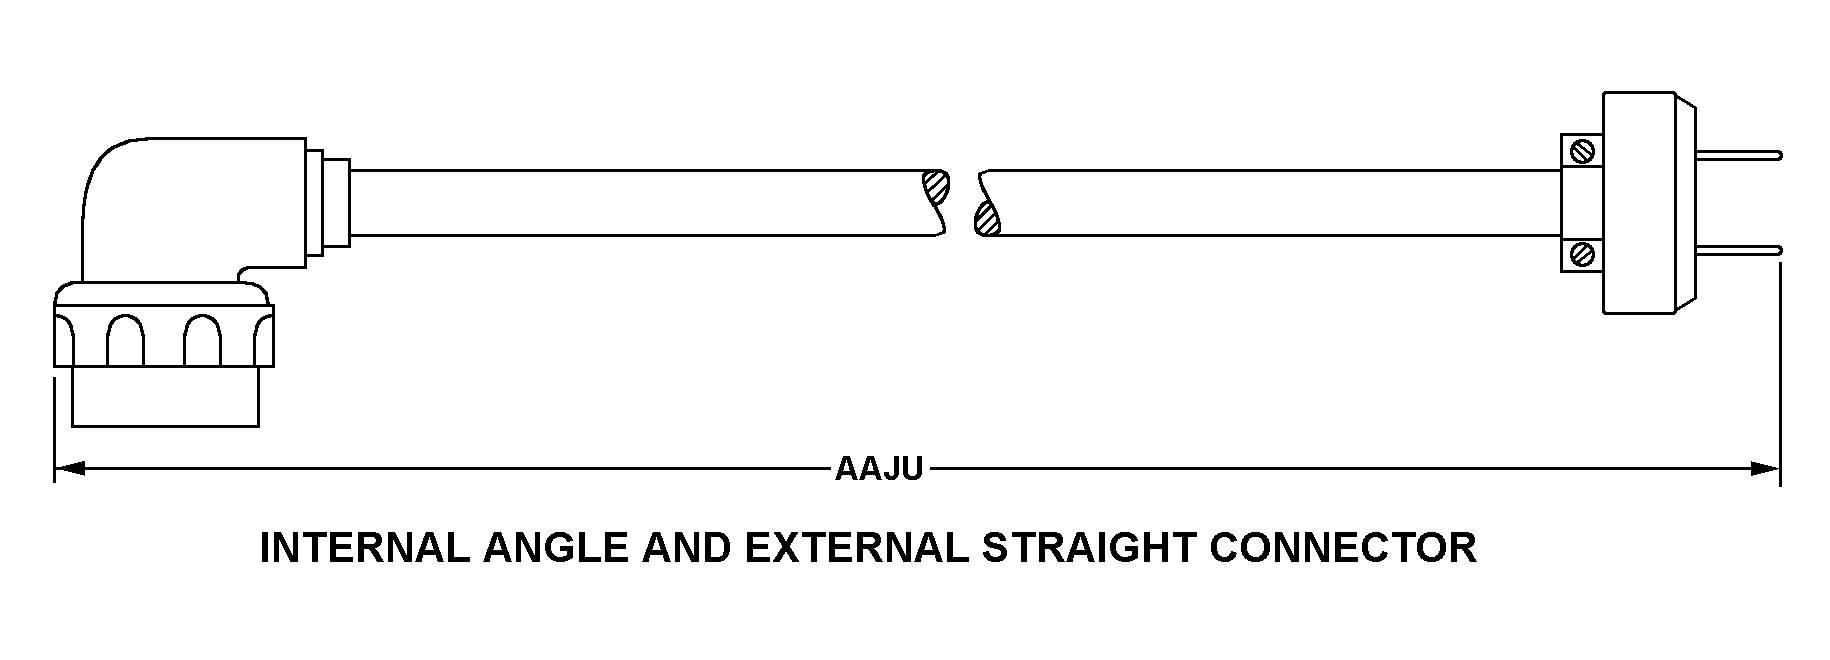 INTERNAL ANGLE AND EXTERNAL STRAIGHT CONNECTOR style nsn 5995-01-129-9170